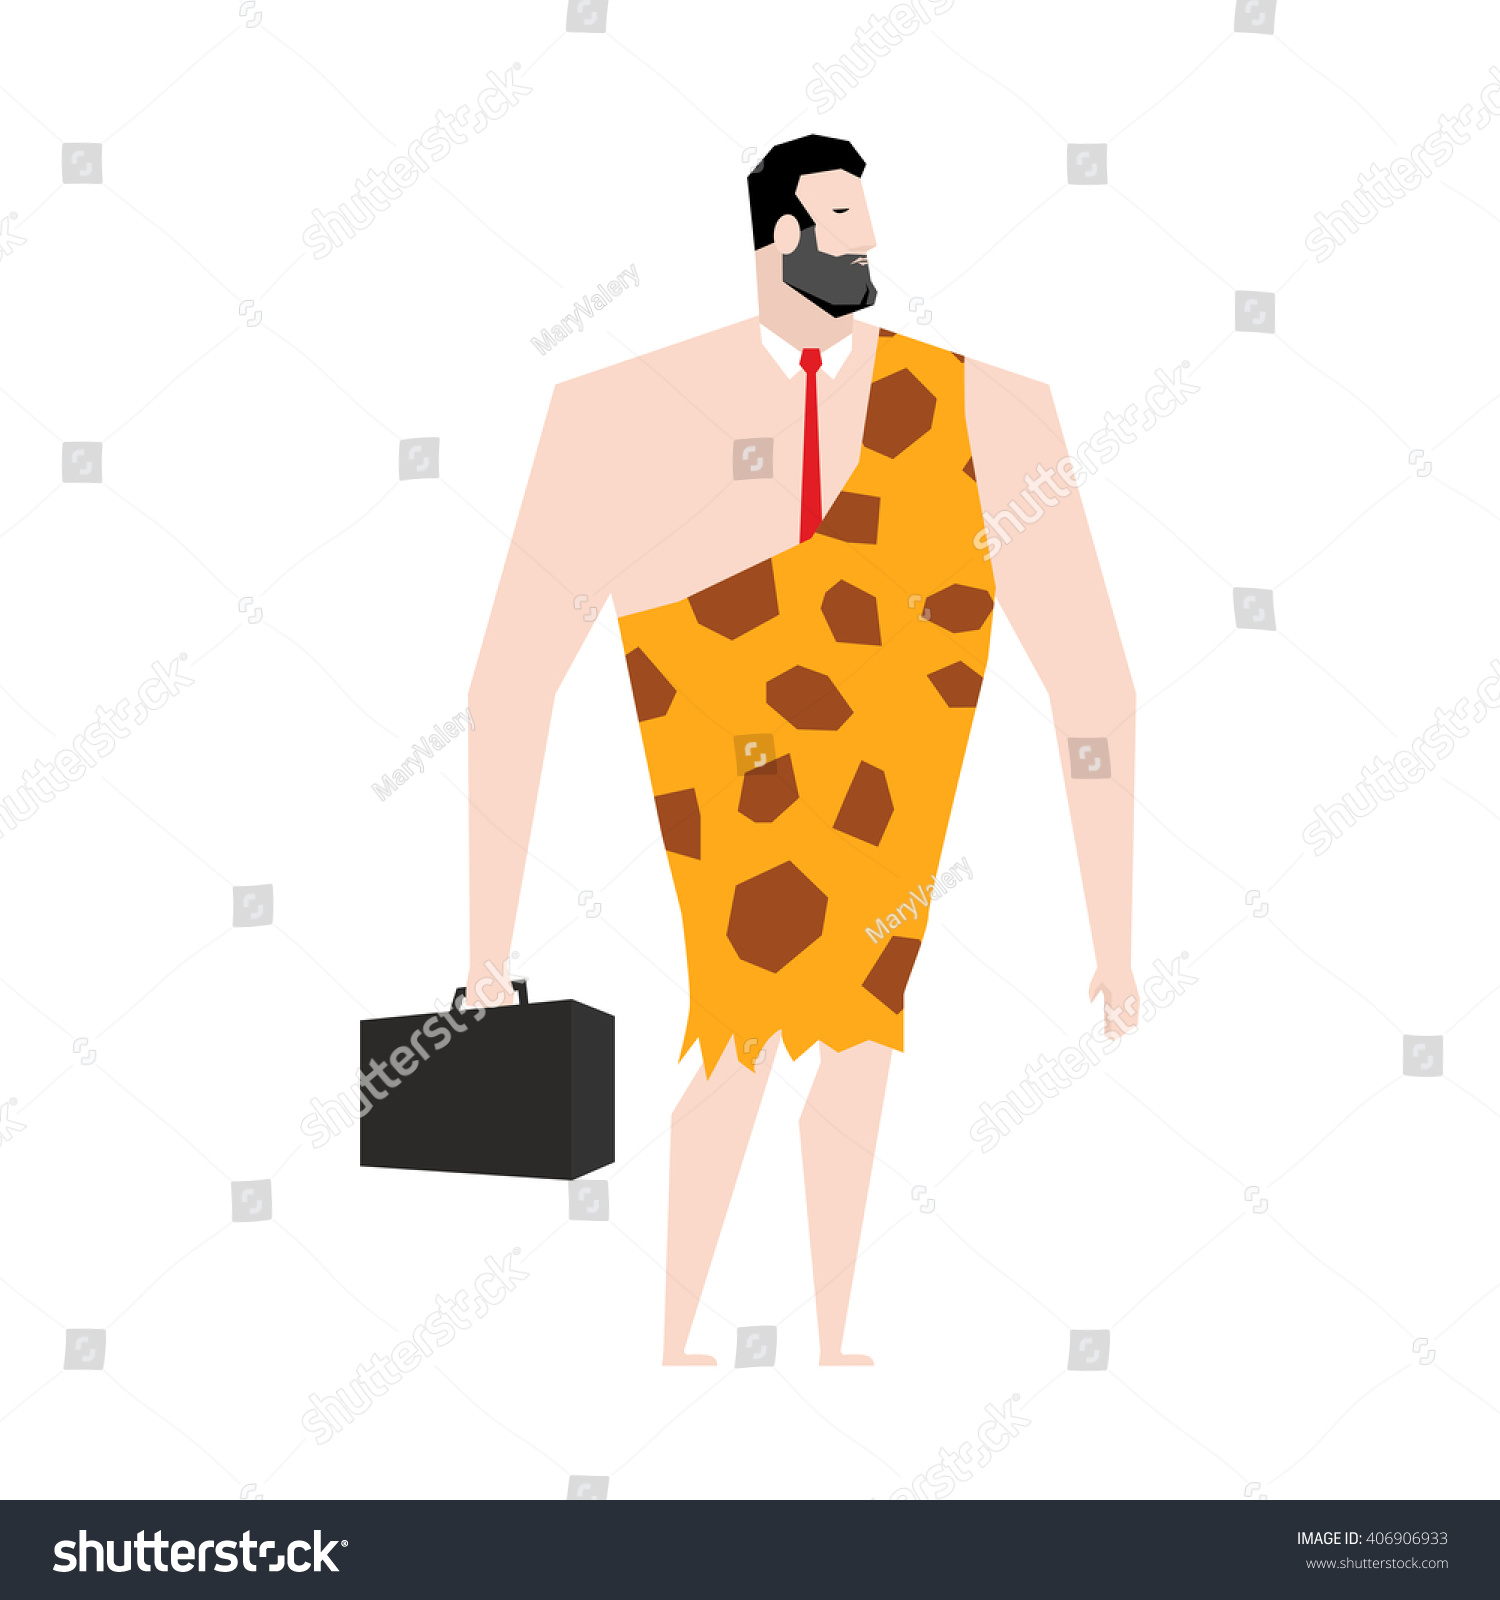 SVG of Businessman prehistoric. Ancient boss in skin of giraffe. Neanderthal ina tie. Cro-Magnon to case. Homo sapiens business man. paleanthropic with suitcase. Caveman Director
 svg